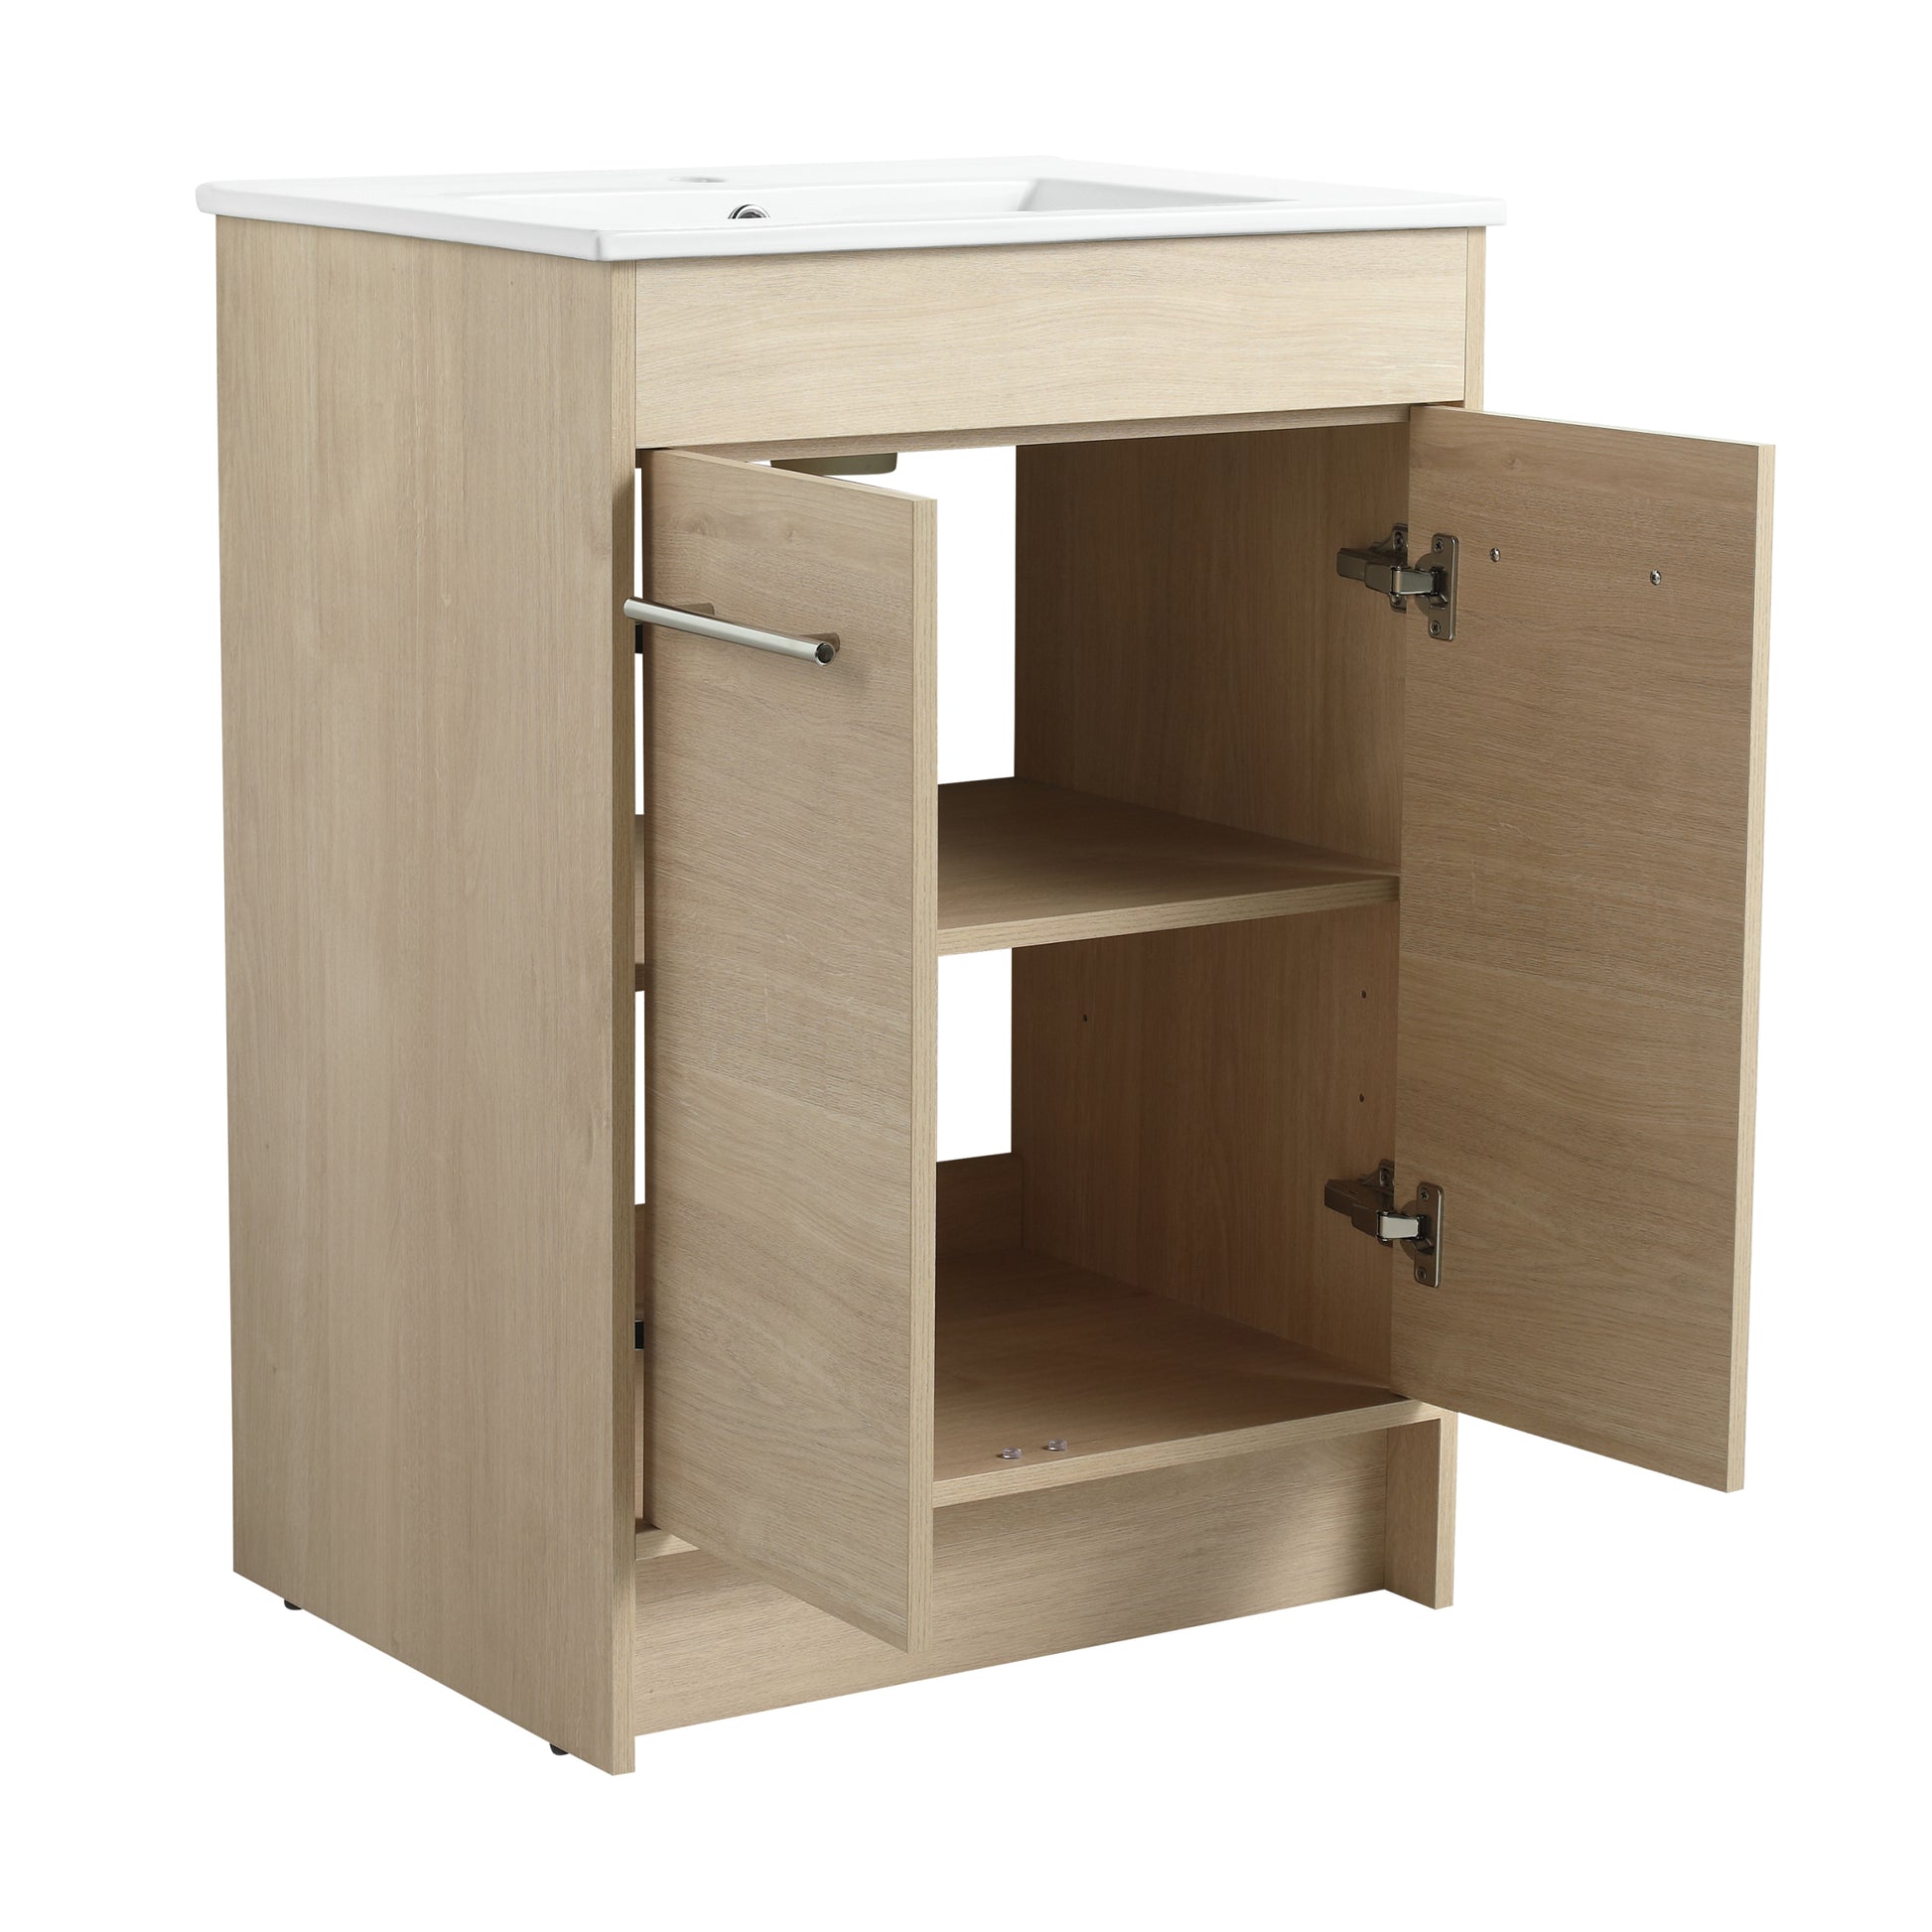 24 Inch Bathroom Cabinet With Sink,Soft Close